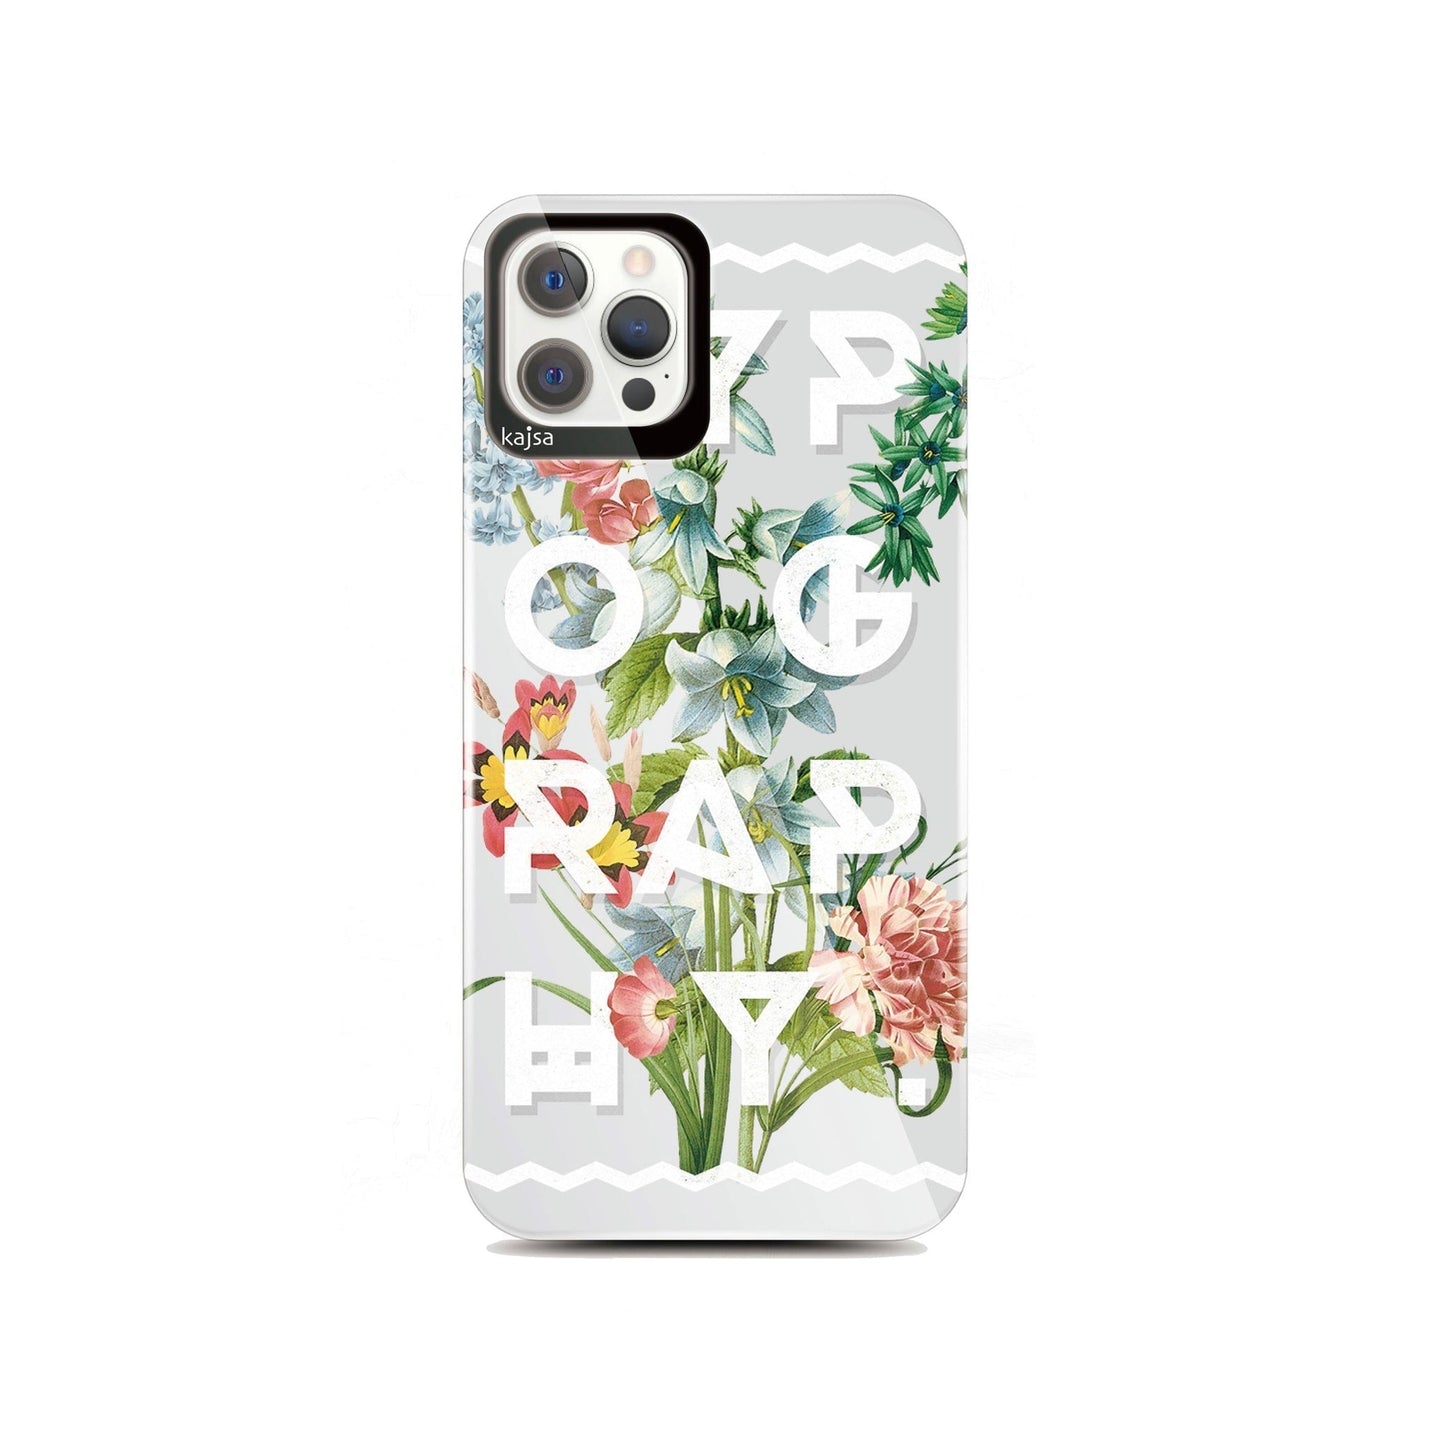 Kajsa Floral Pattern Cover For Iphone